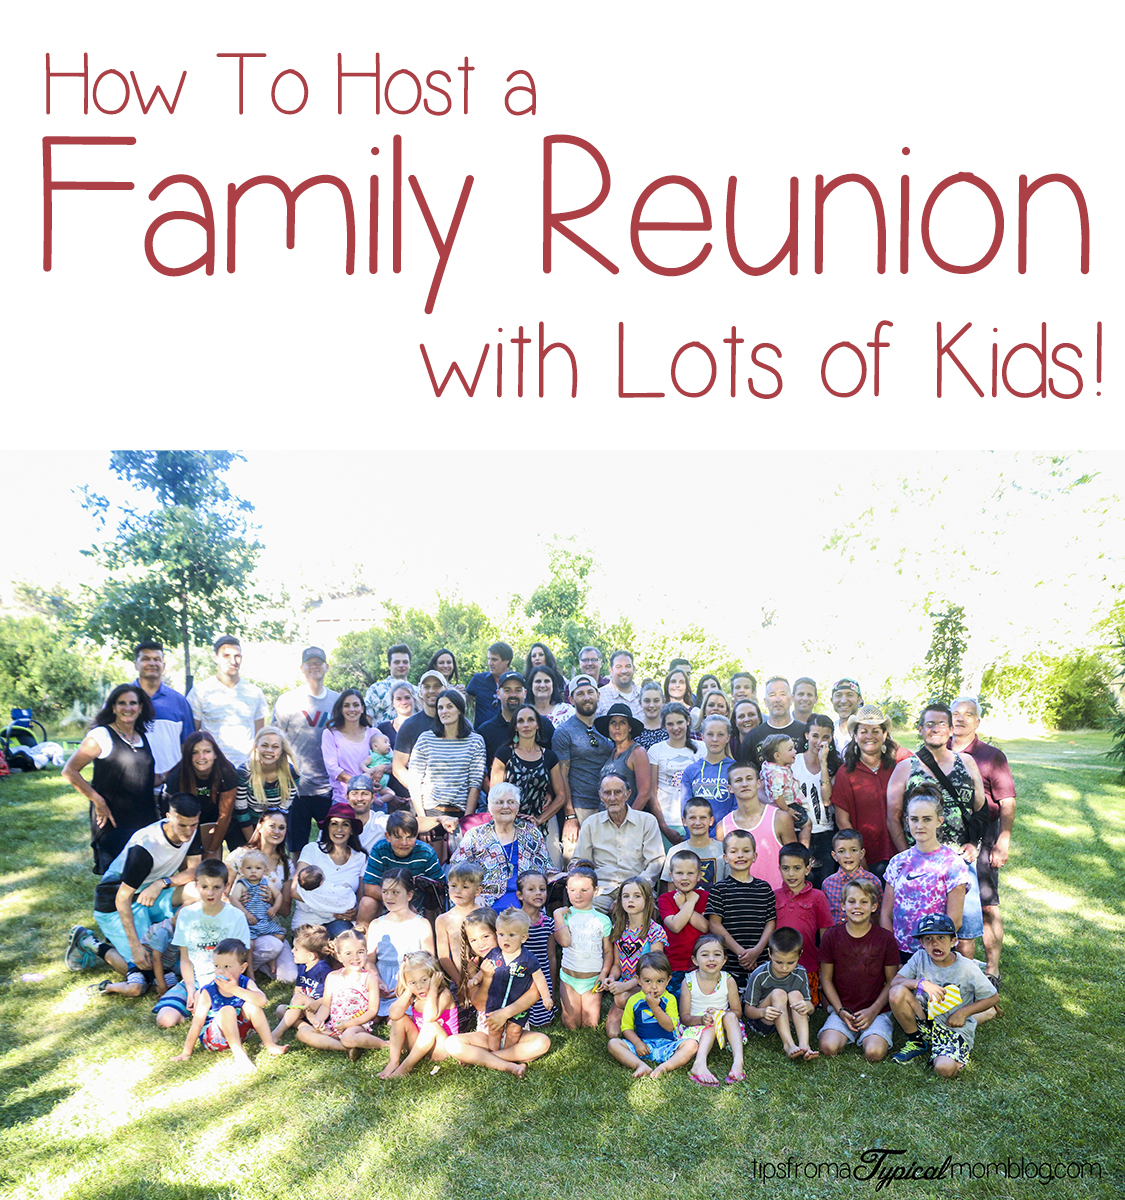 How to Host a Family Reunion with Lots of Kids